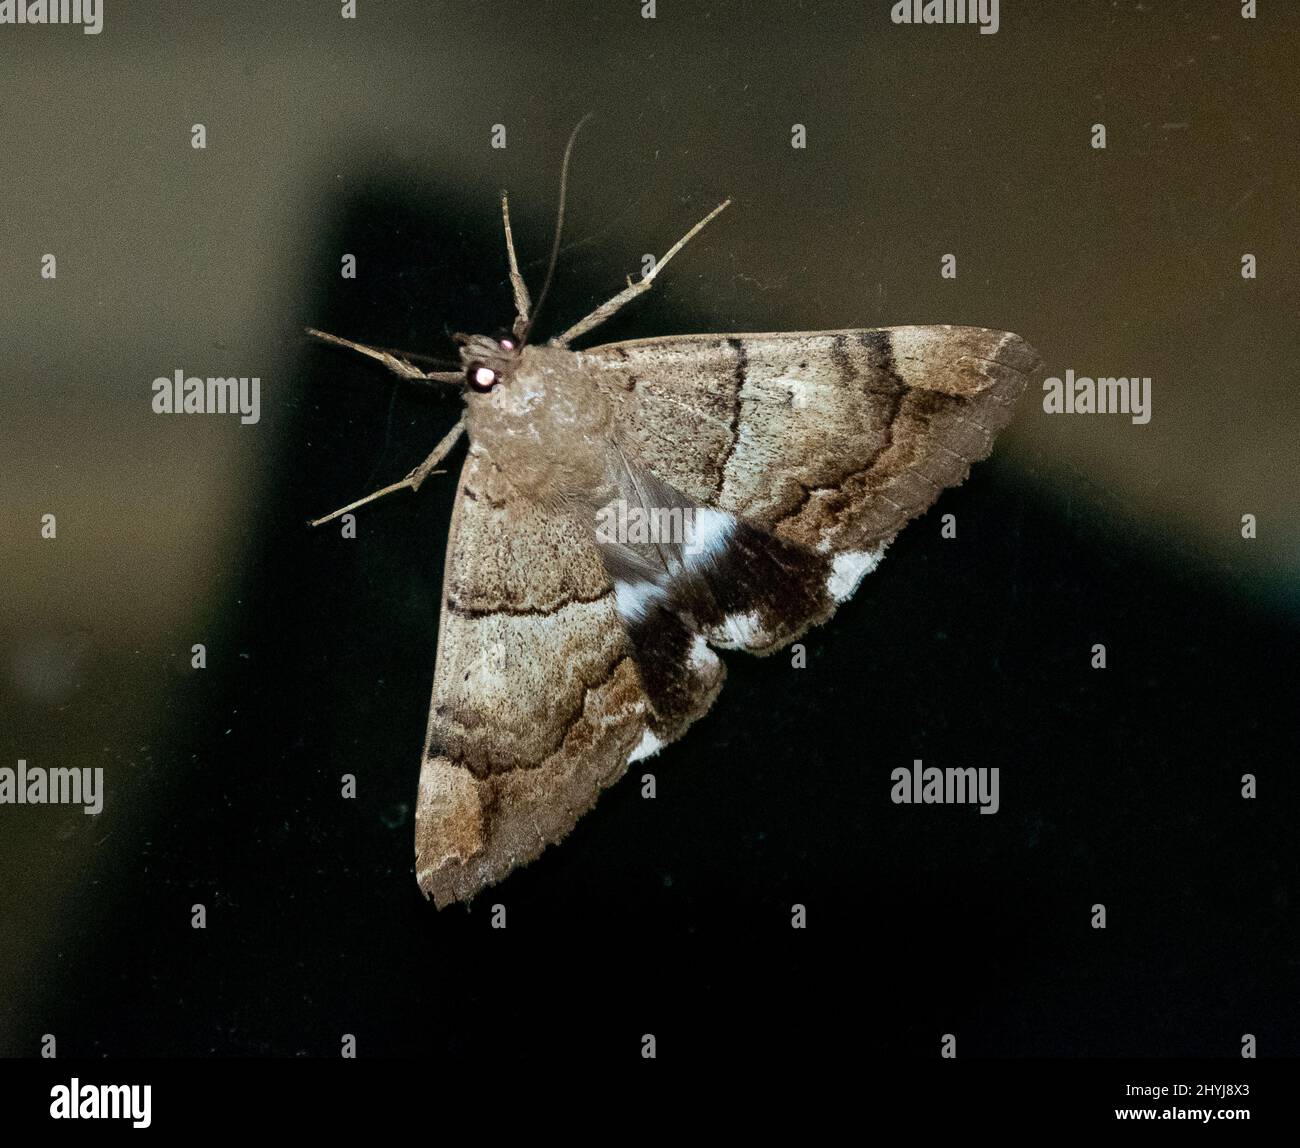 Australian White underwing moth, Achaea eusciasta, with intricately patterned forewings and black and white hindwings. Queensland, dark background. Stock Photo